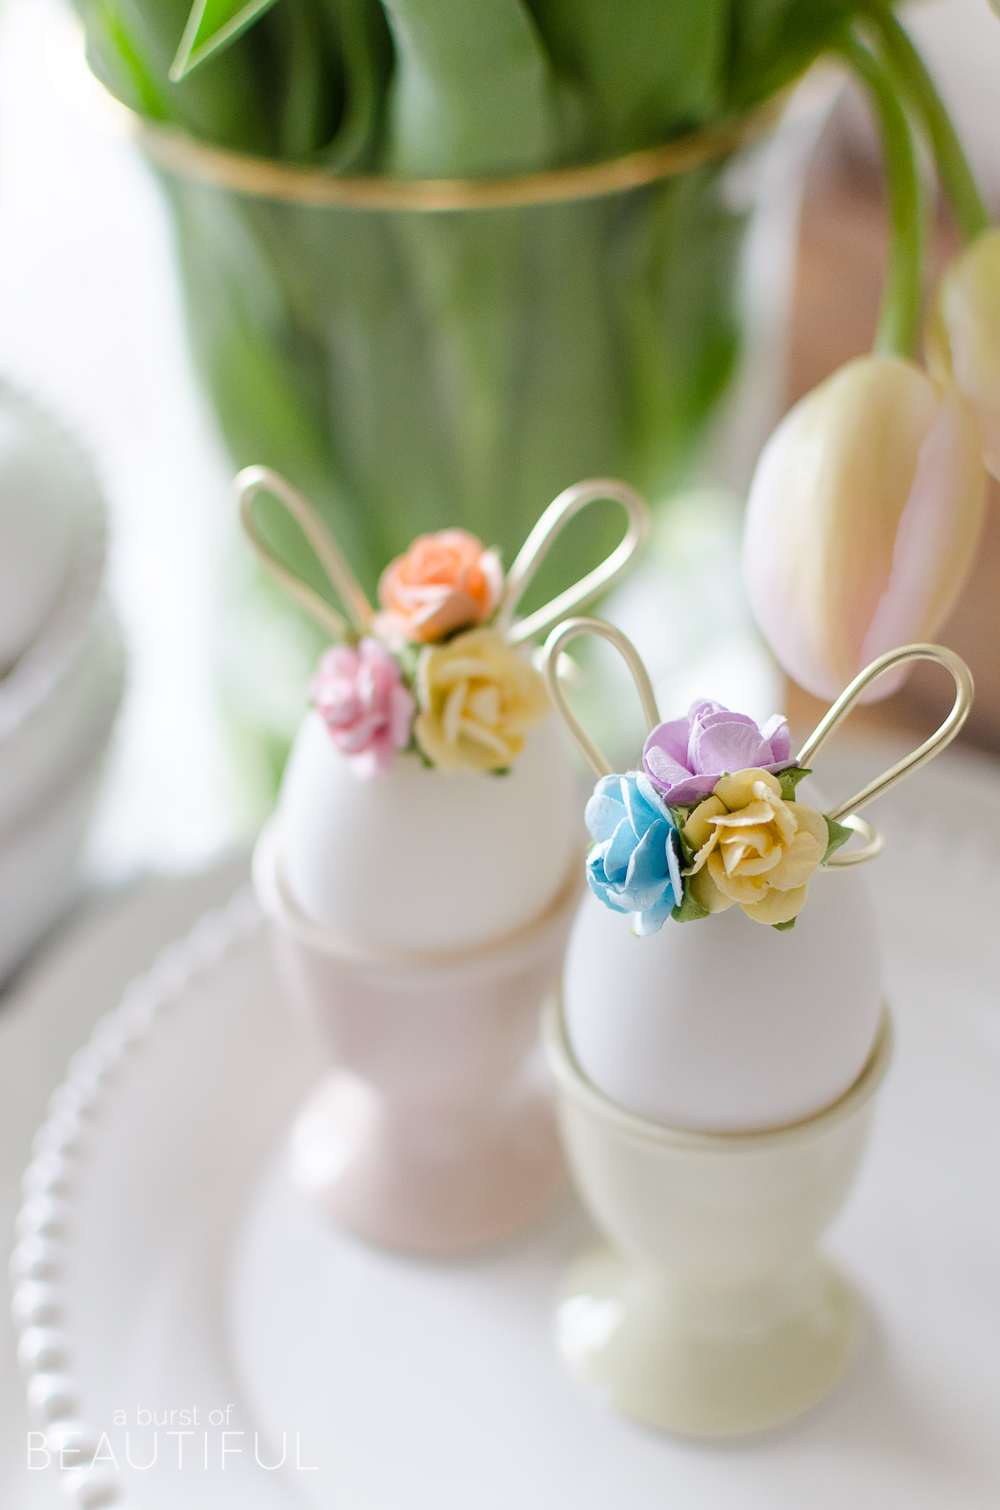 Easter Egg Decorating Idea | Decorate your Easter eggs this holiday with these miniature DIY gold wire bunny ears and floral crowns for a sweet and whimsical touch. 